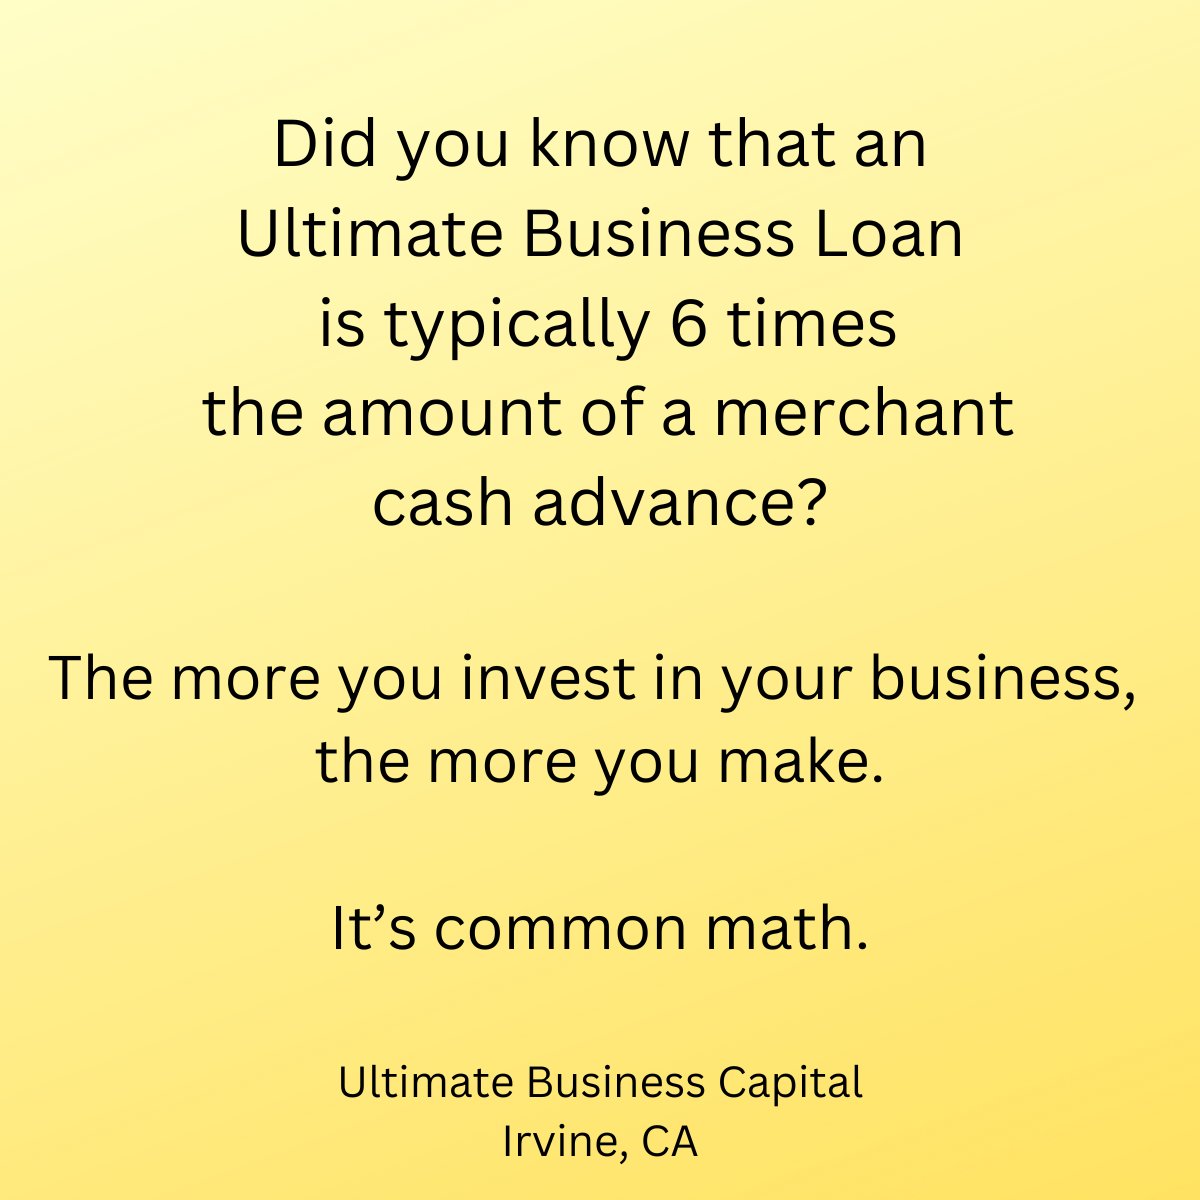 The more you borrow and invest, the more MONEY you make.

#businessloans
#lineofcredit
#sba